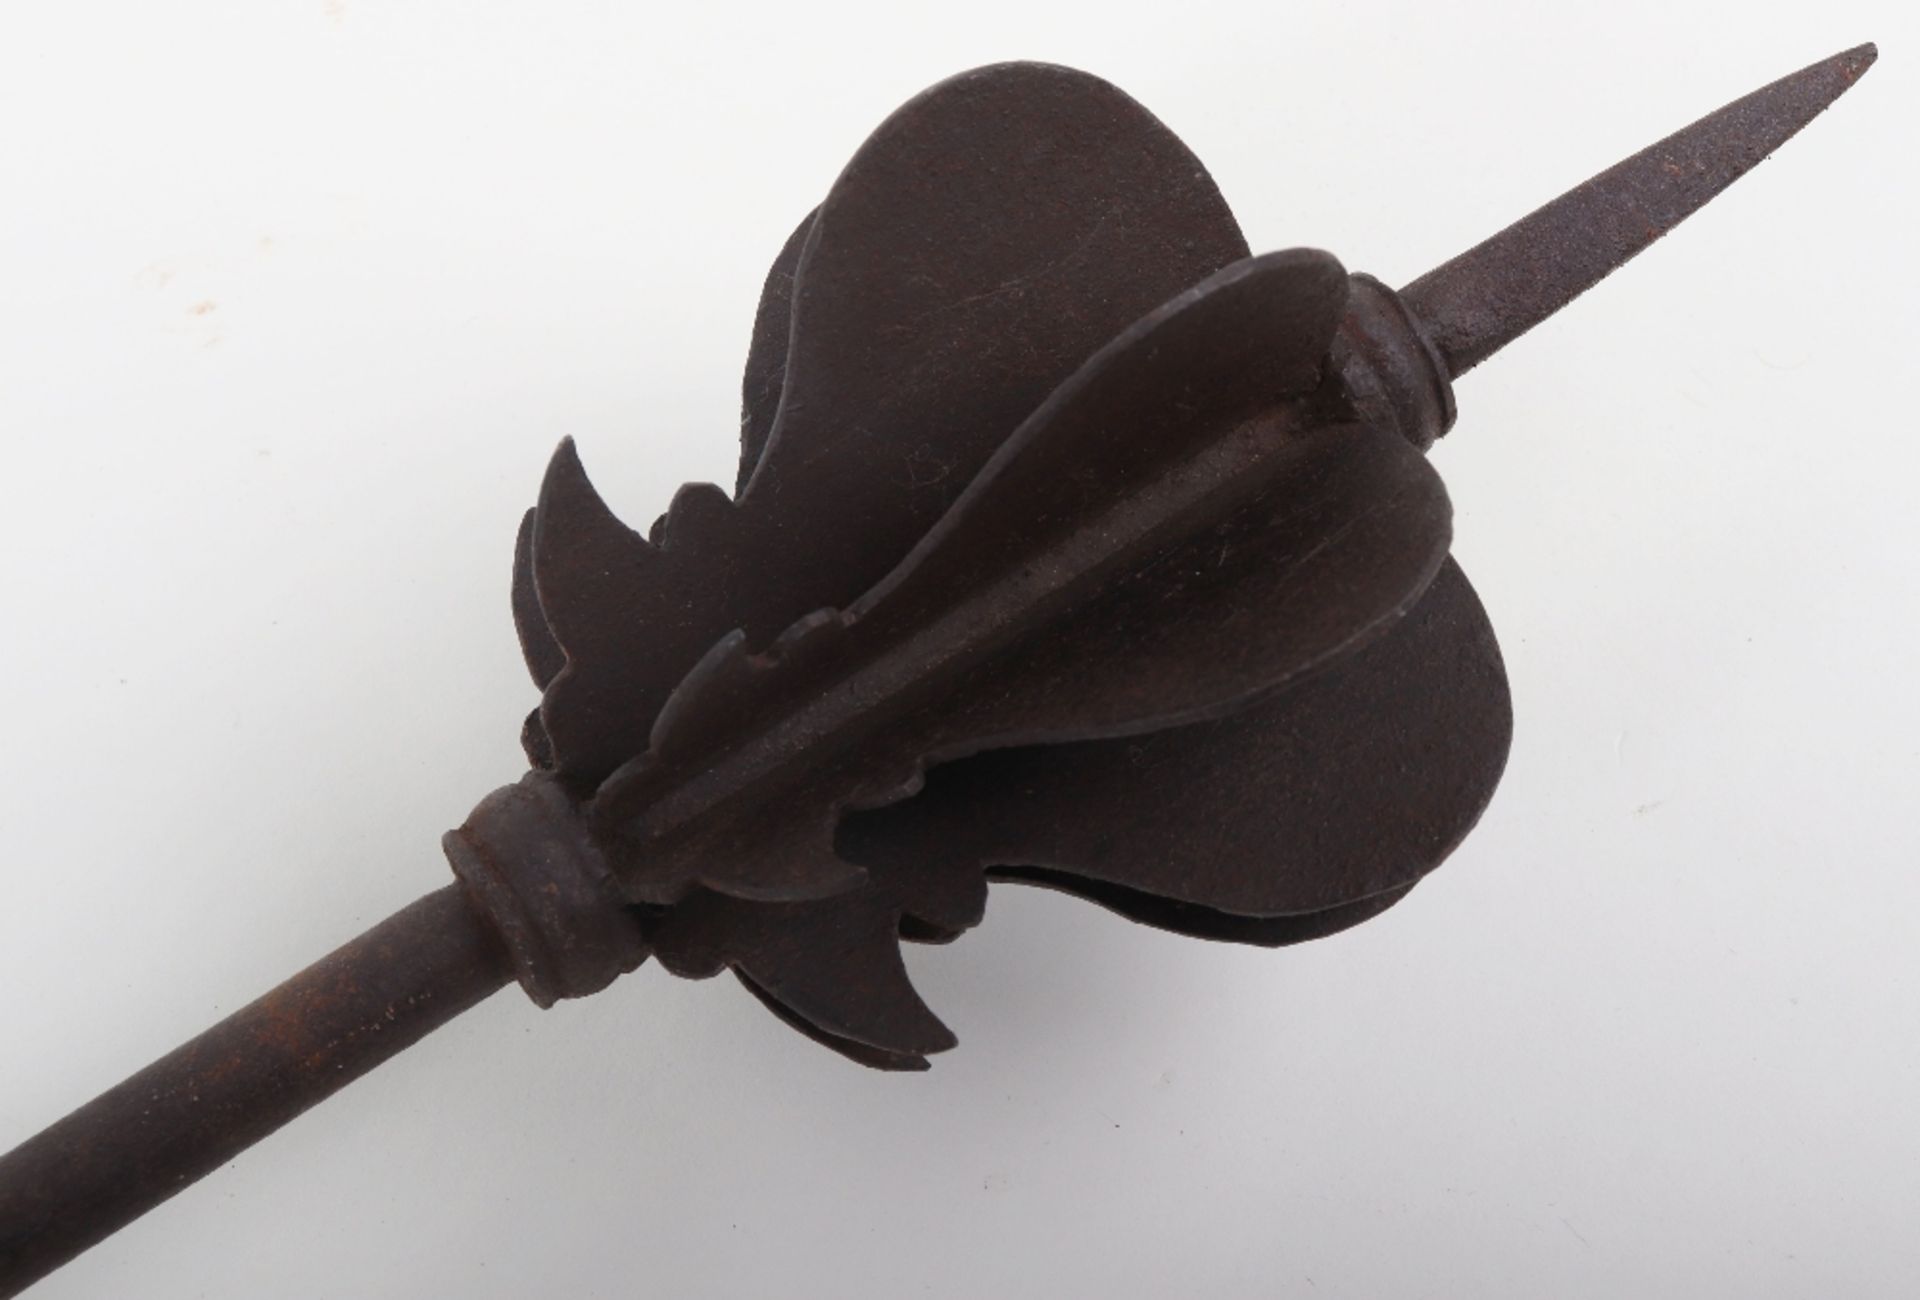 Indian Iron Mace, 18th/19th Century - Image 6 of 11